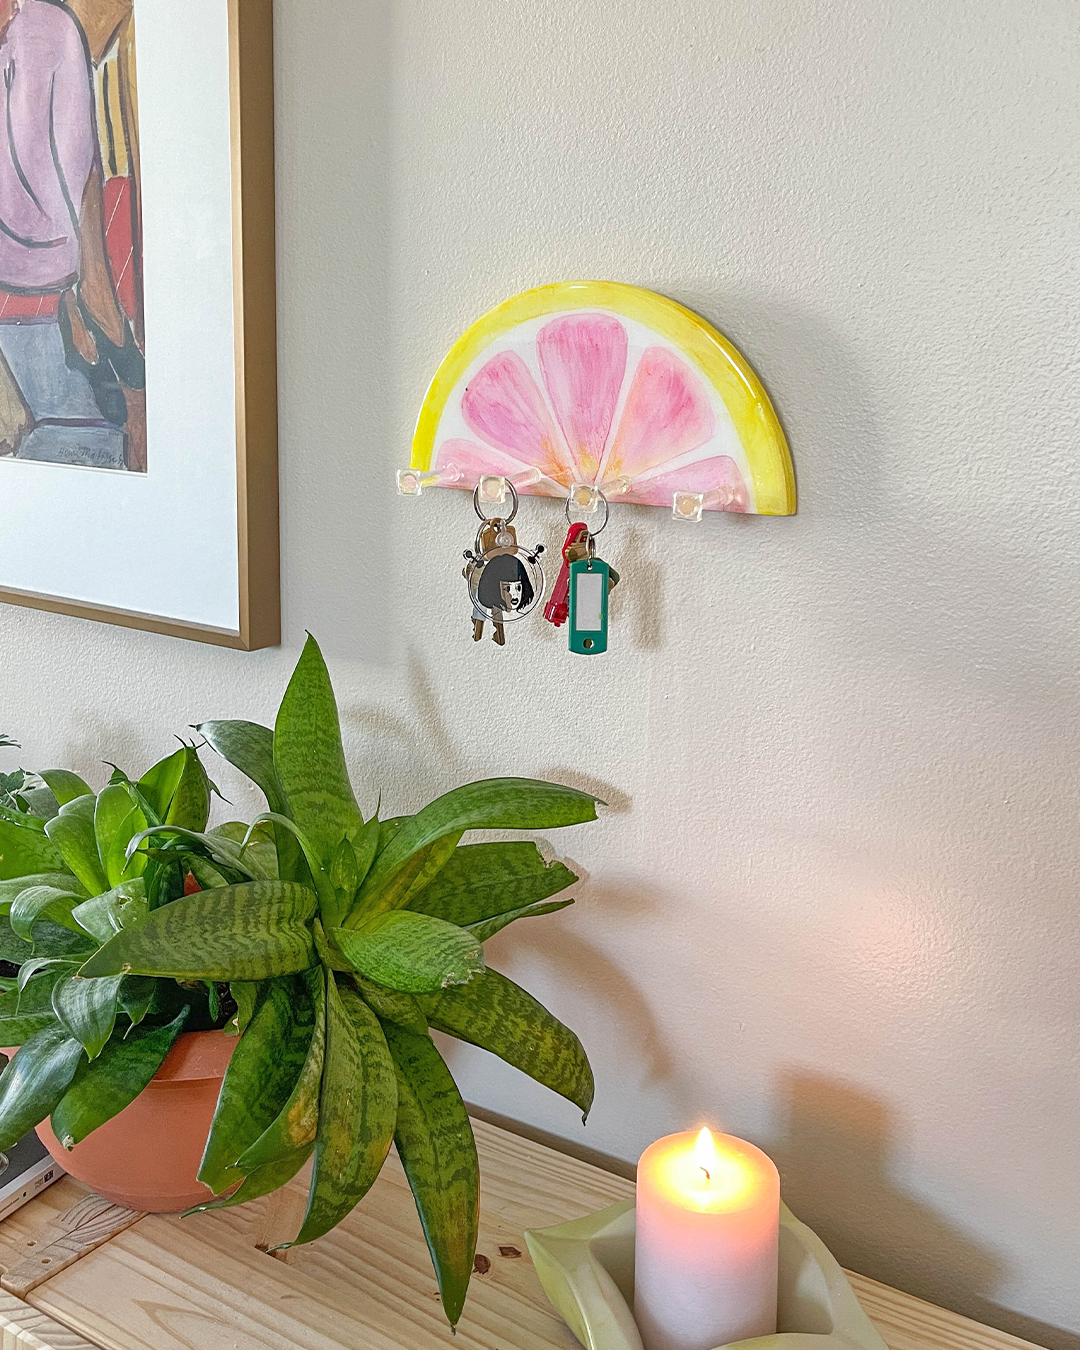 Unique pink grapefruit-inspired key and jewelry wall hanger in a bright, hand-painted design